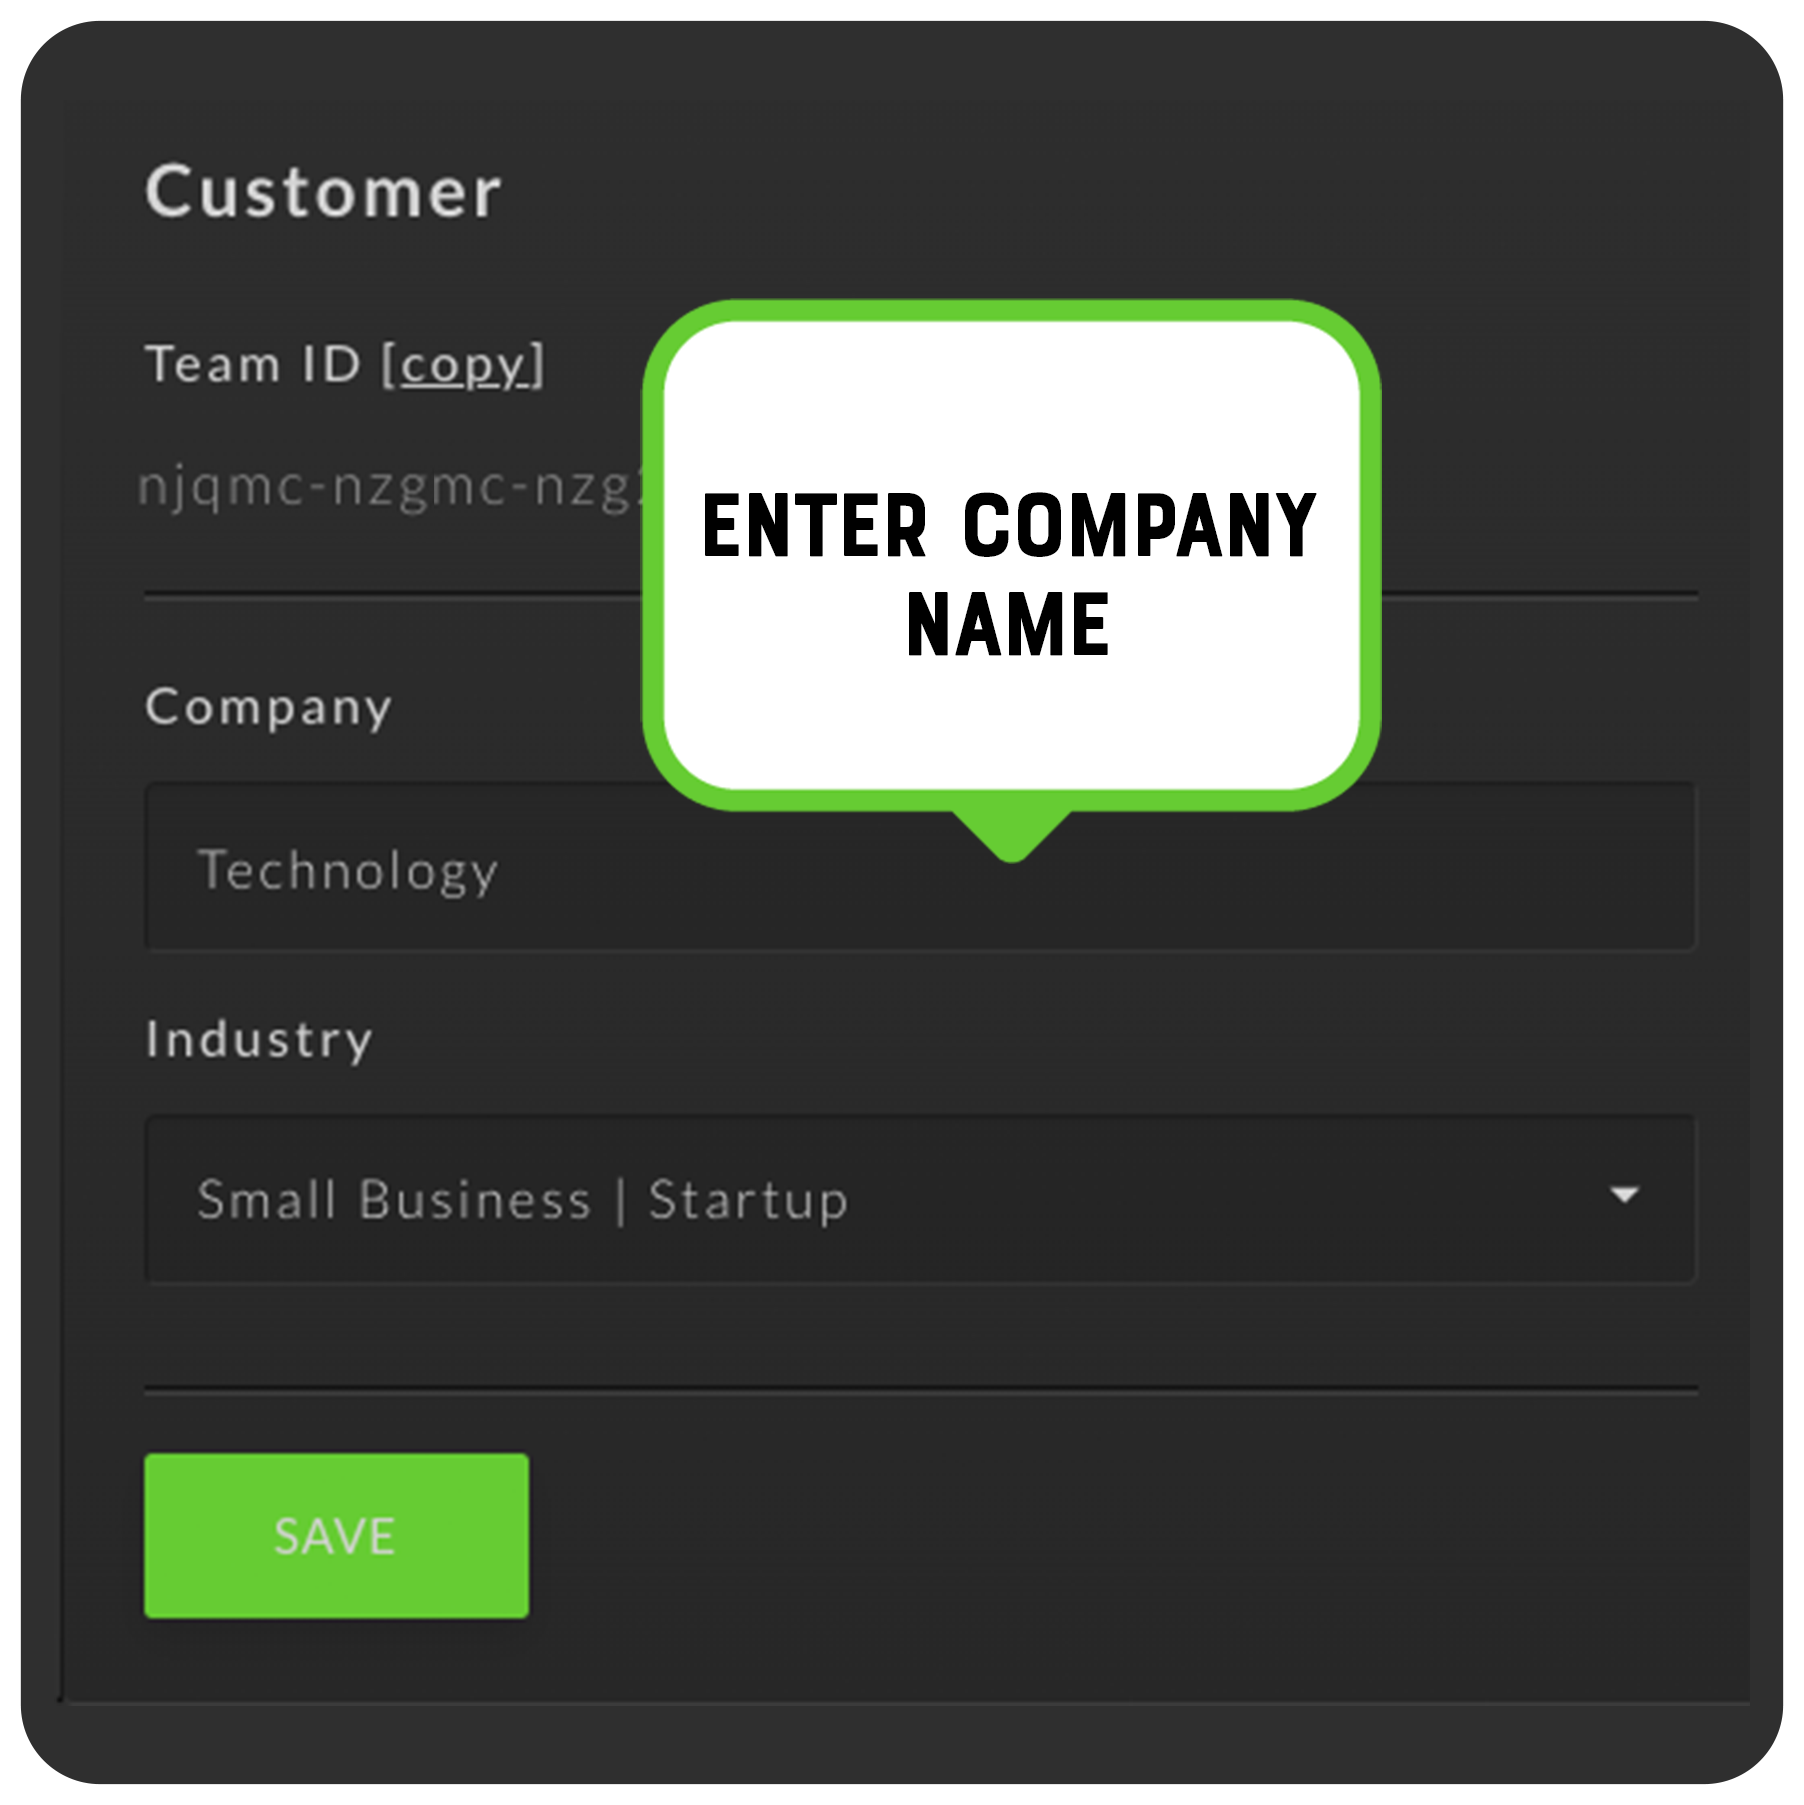 switchboard-live-enter-company-name.png